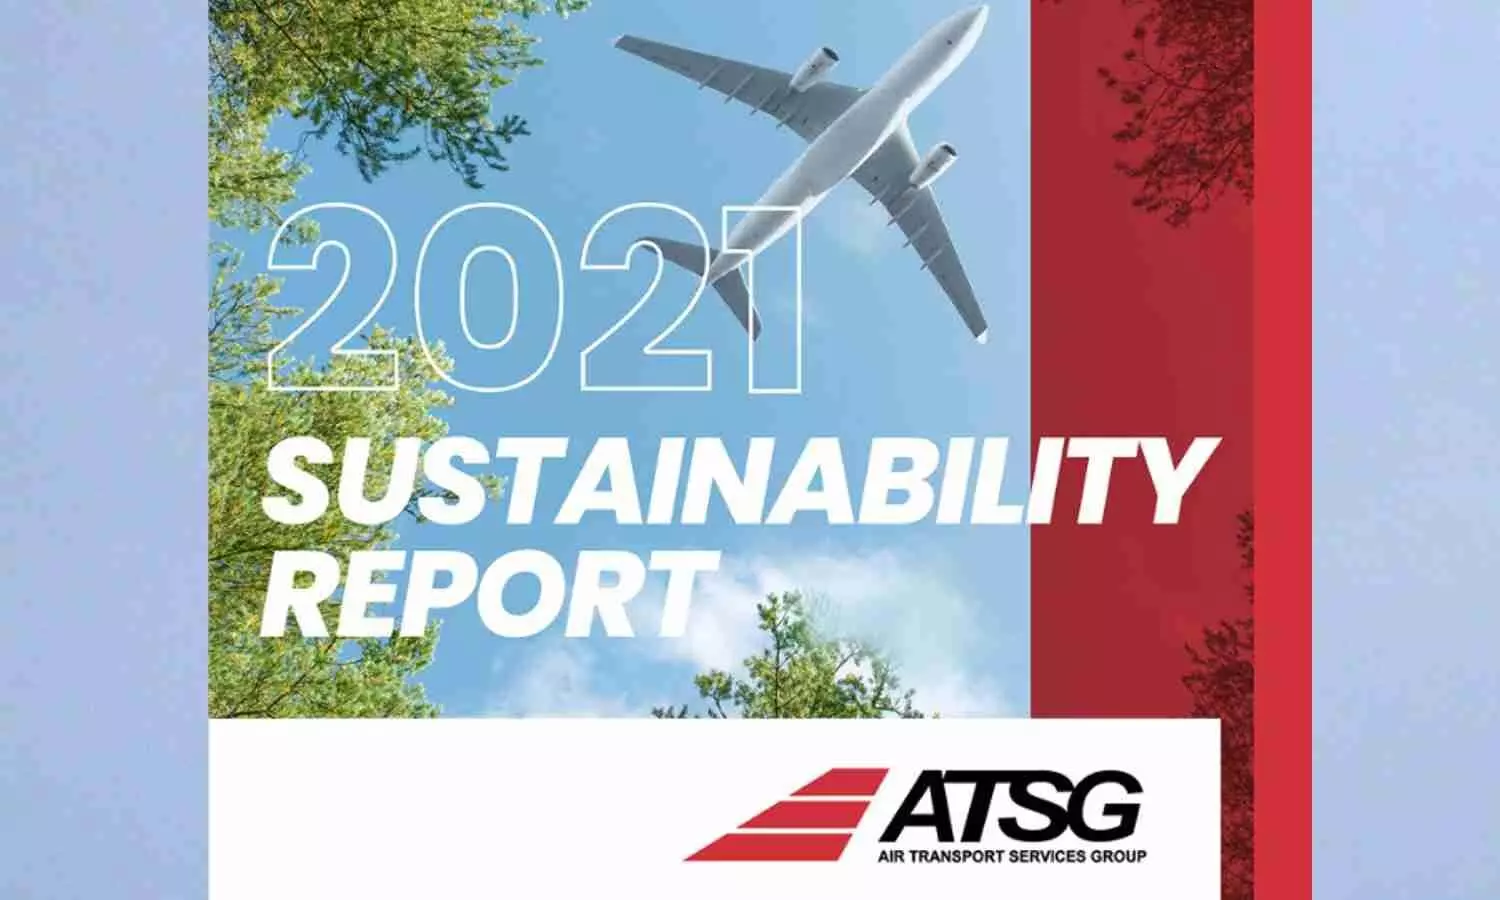 ATSG issues its first sustainability report